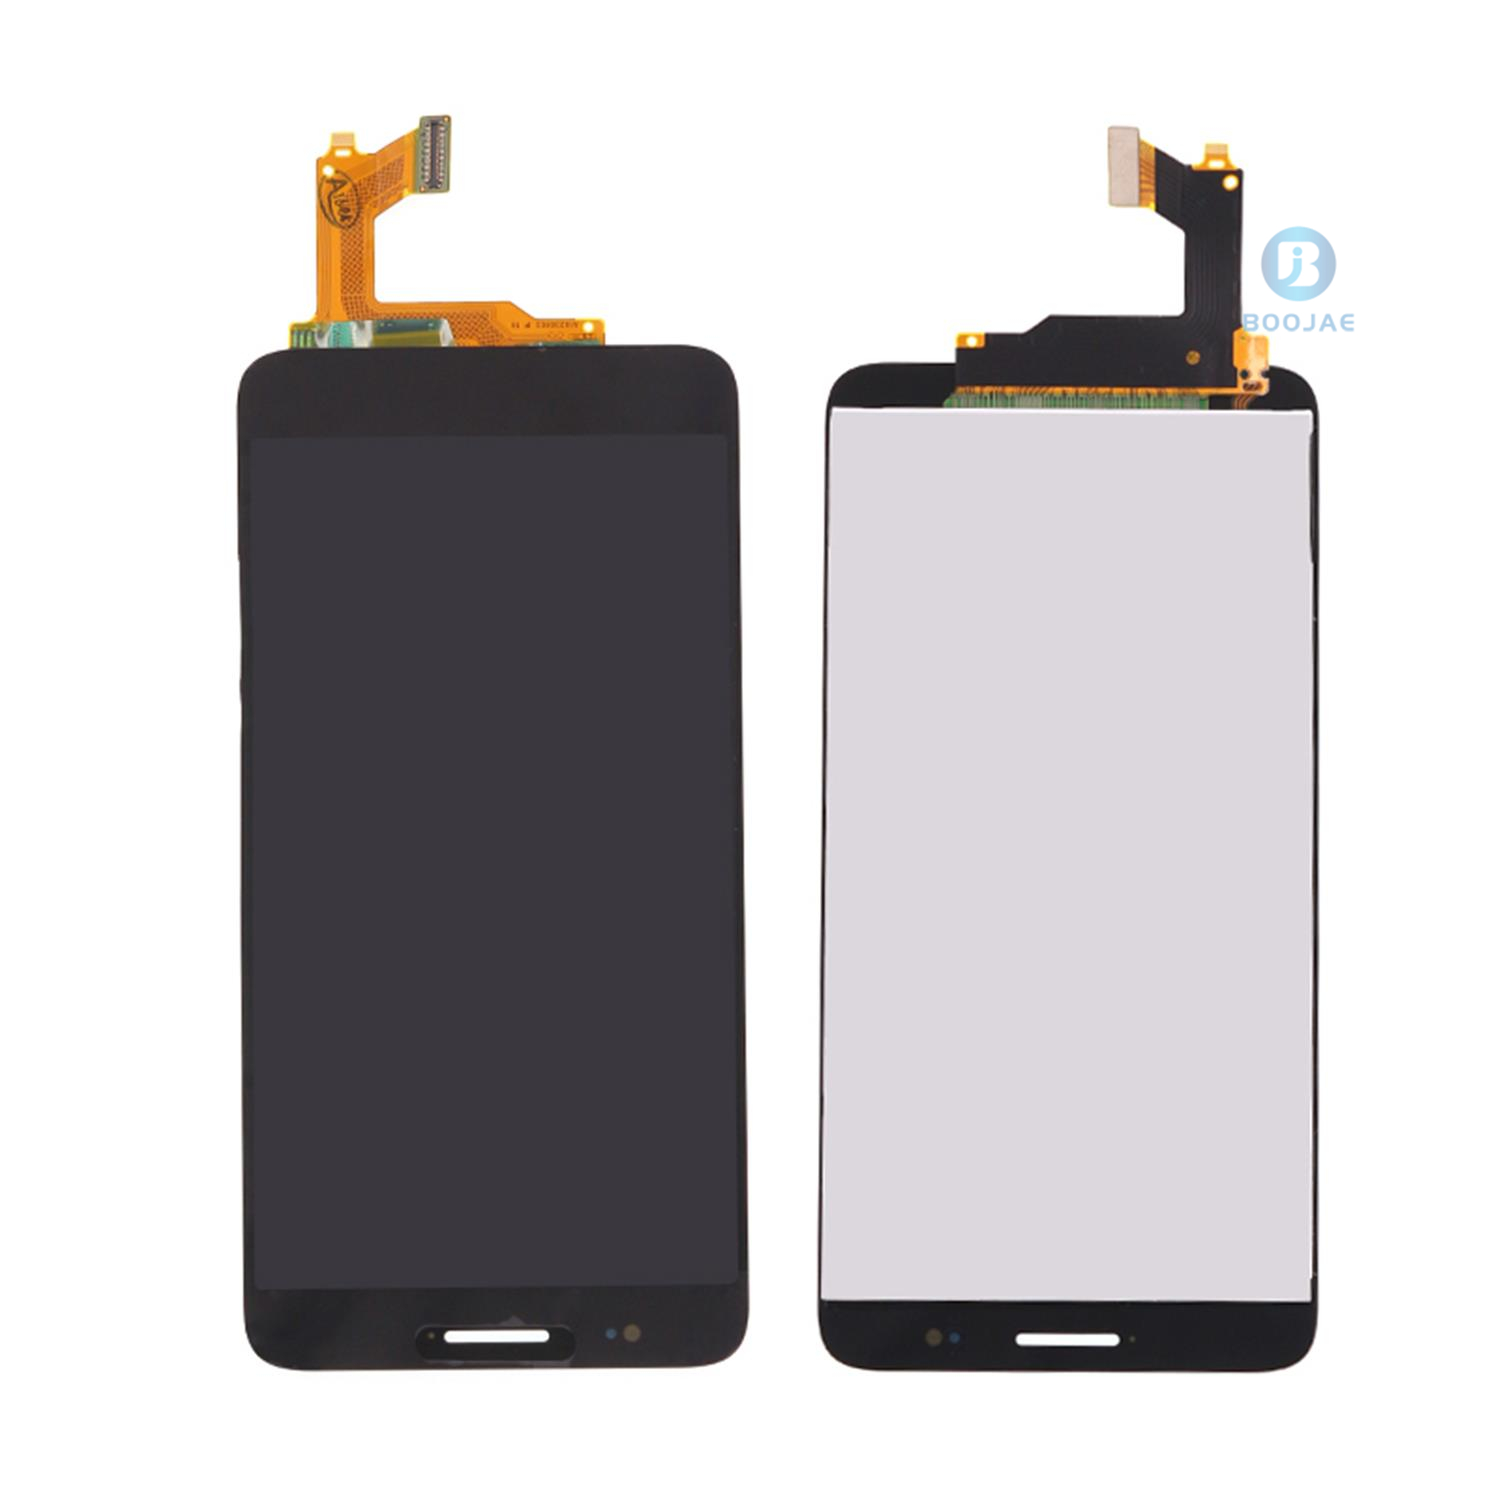 For Huawei Honor 7i LCD Screen Display and Touch Panel Digitizer Assembly Replacement